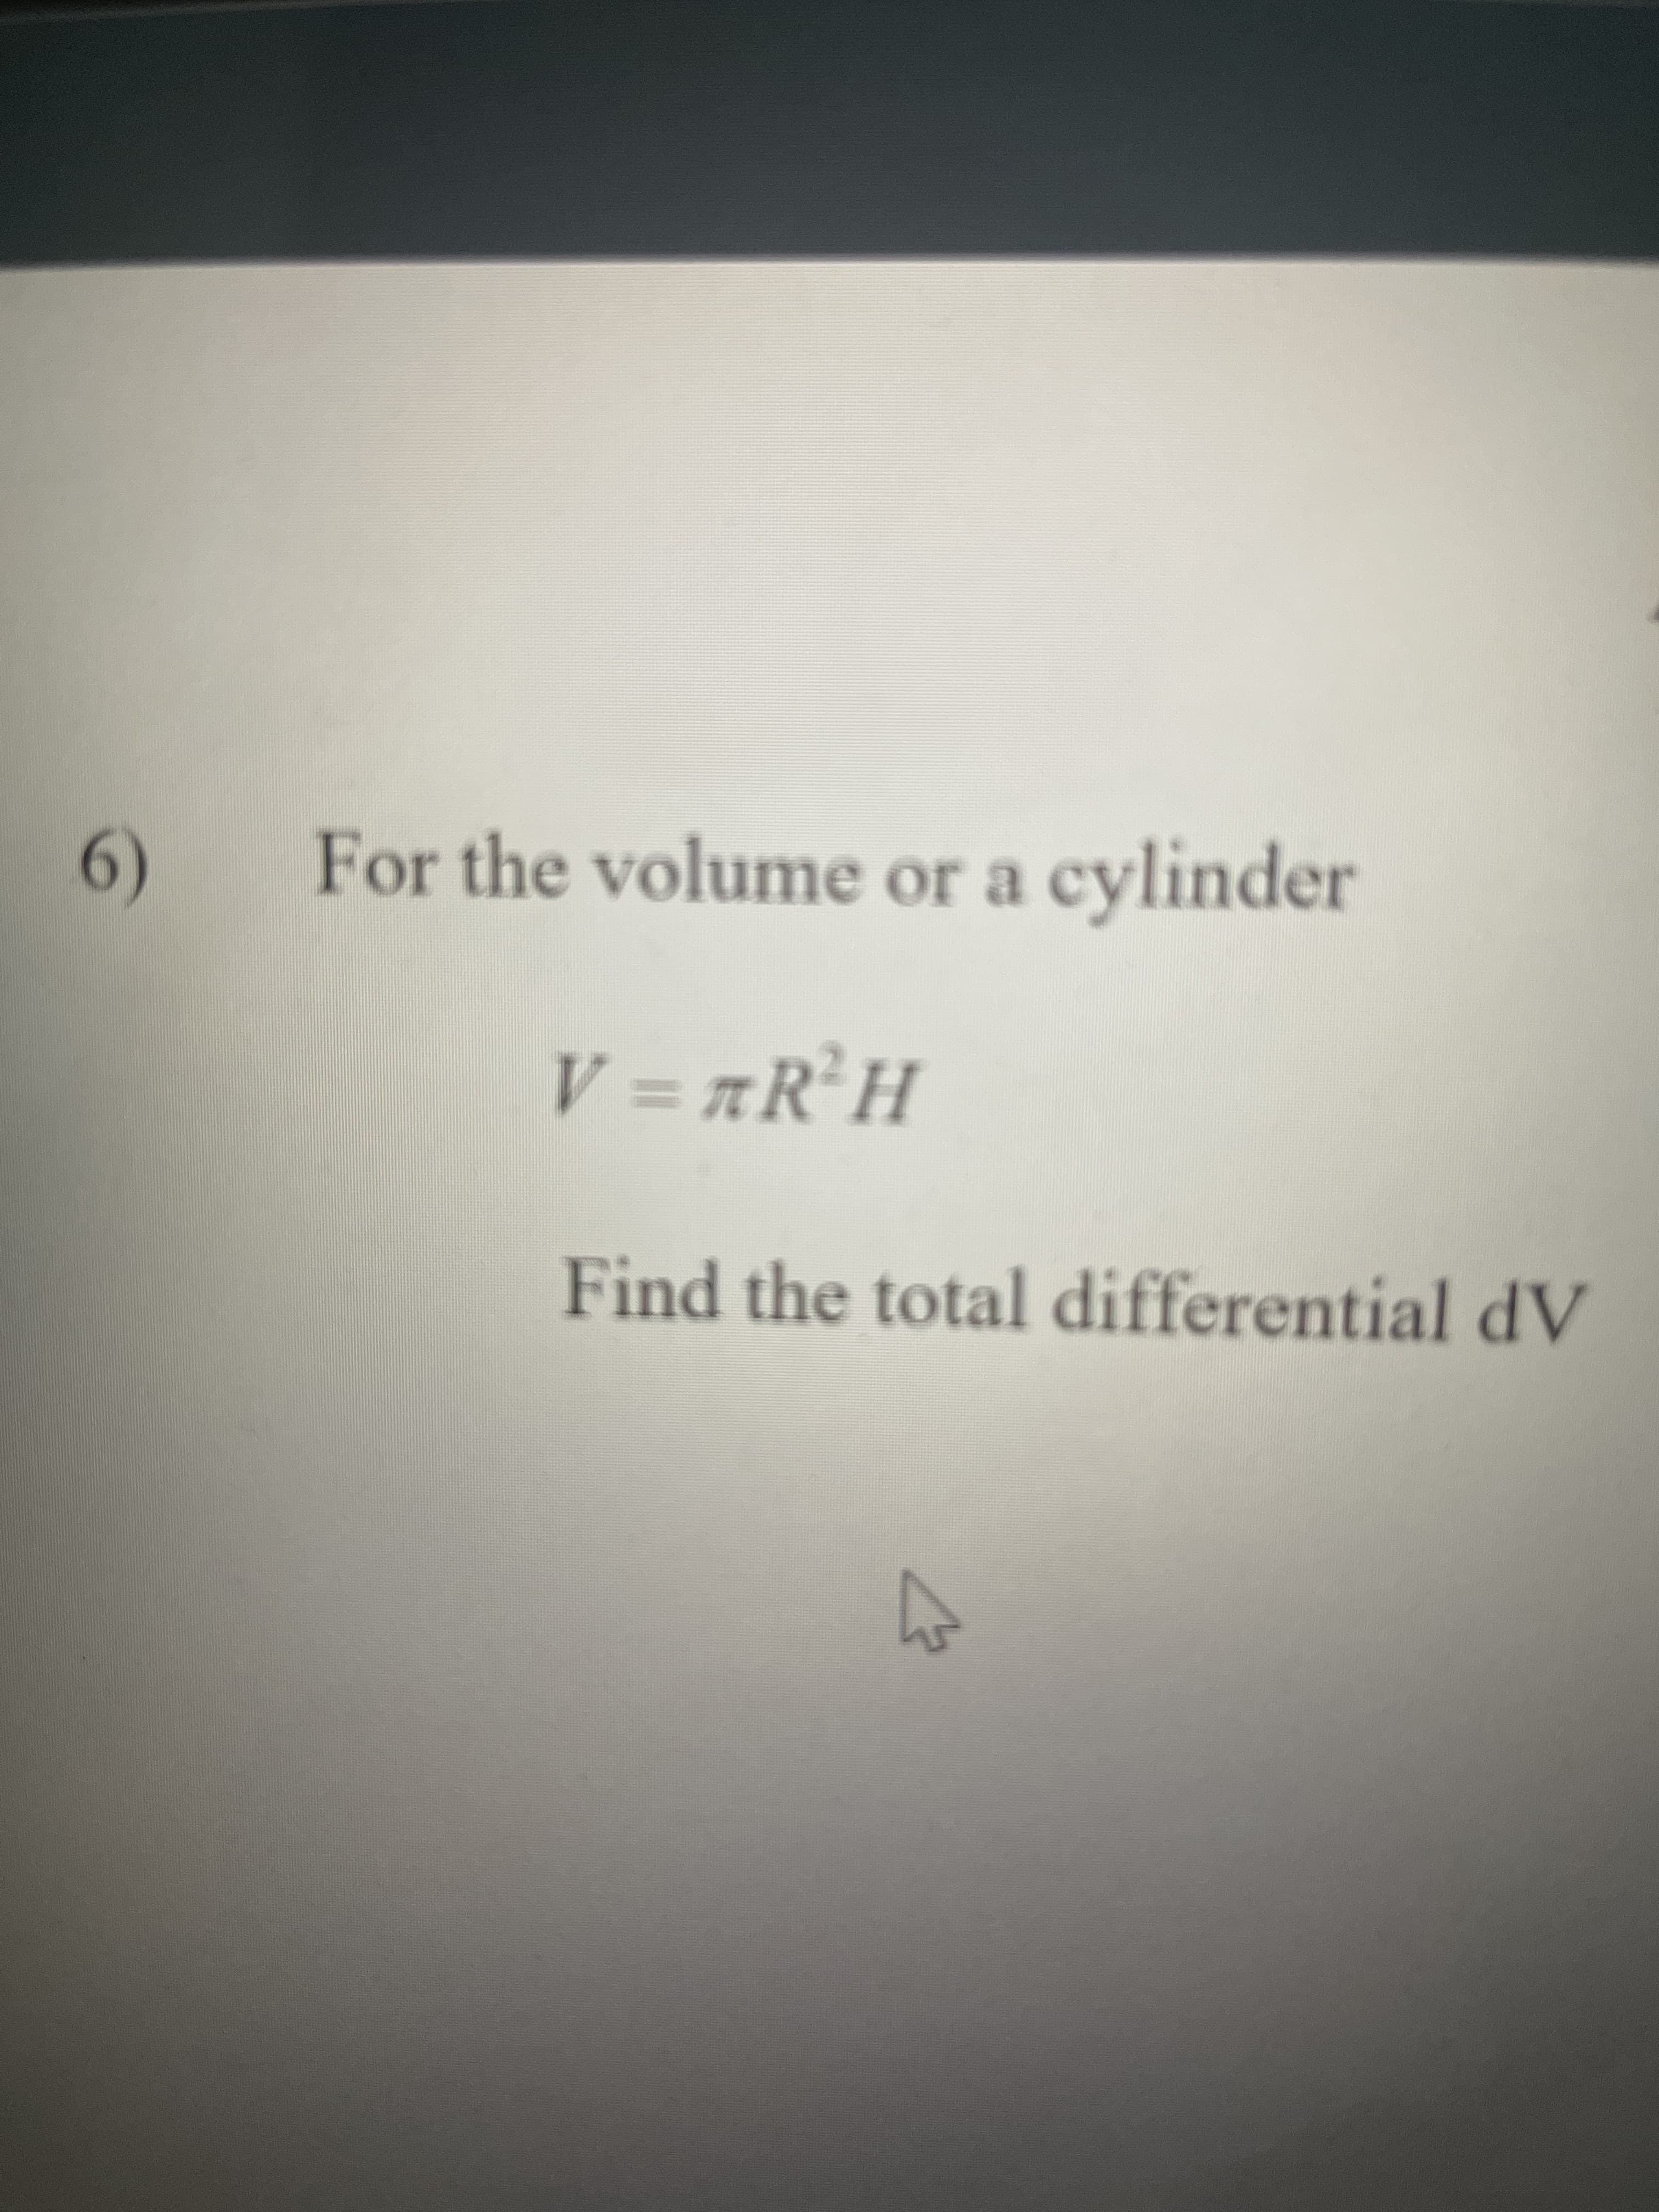 For the volume or a cylinder
V = RR*H
Find the total differential dV
